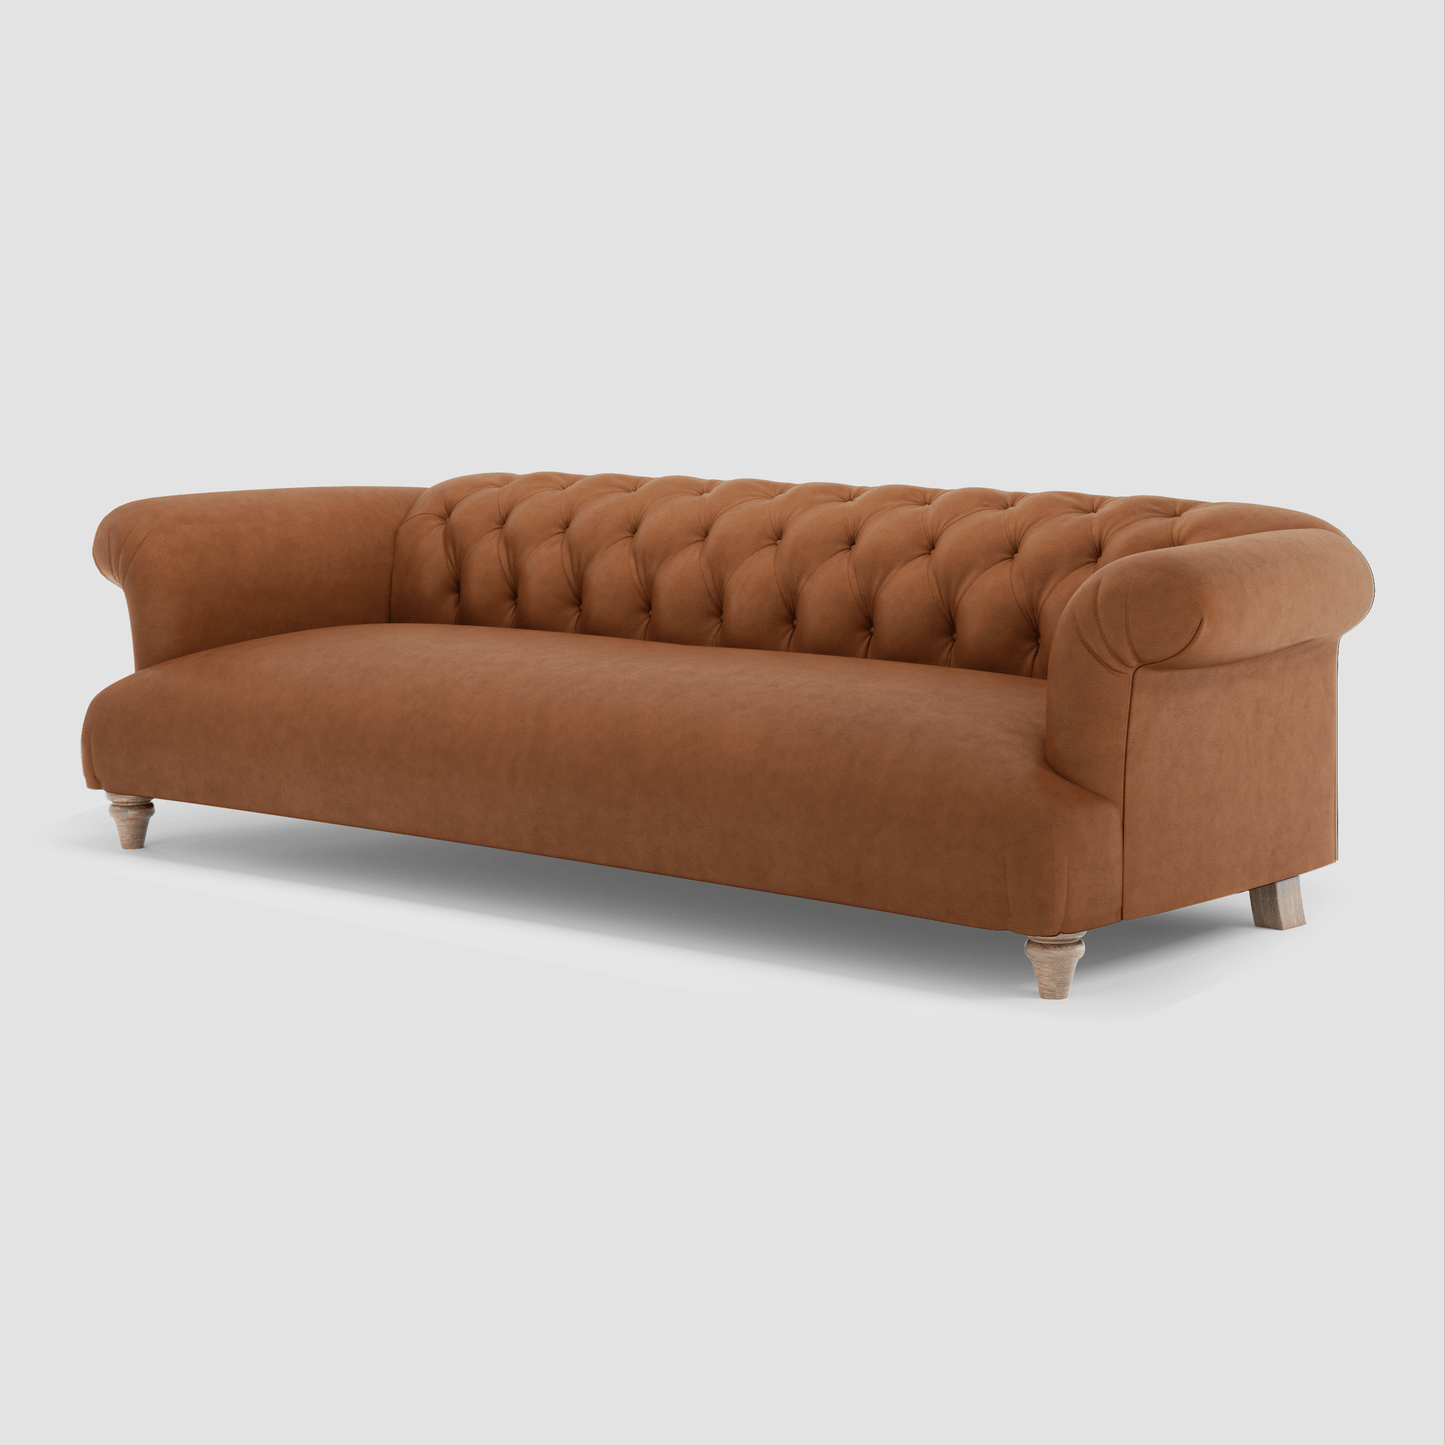 Aggy Four Seater Sofa - Flown the Coop